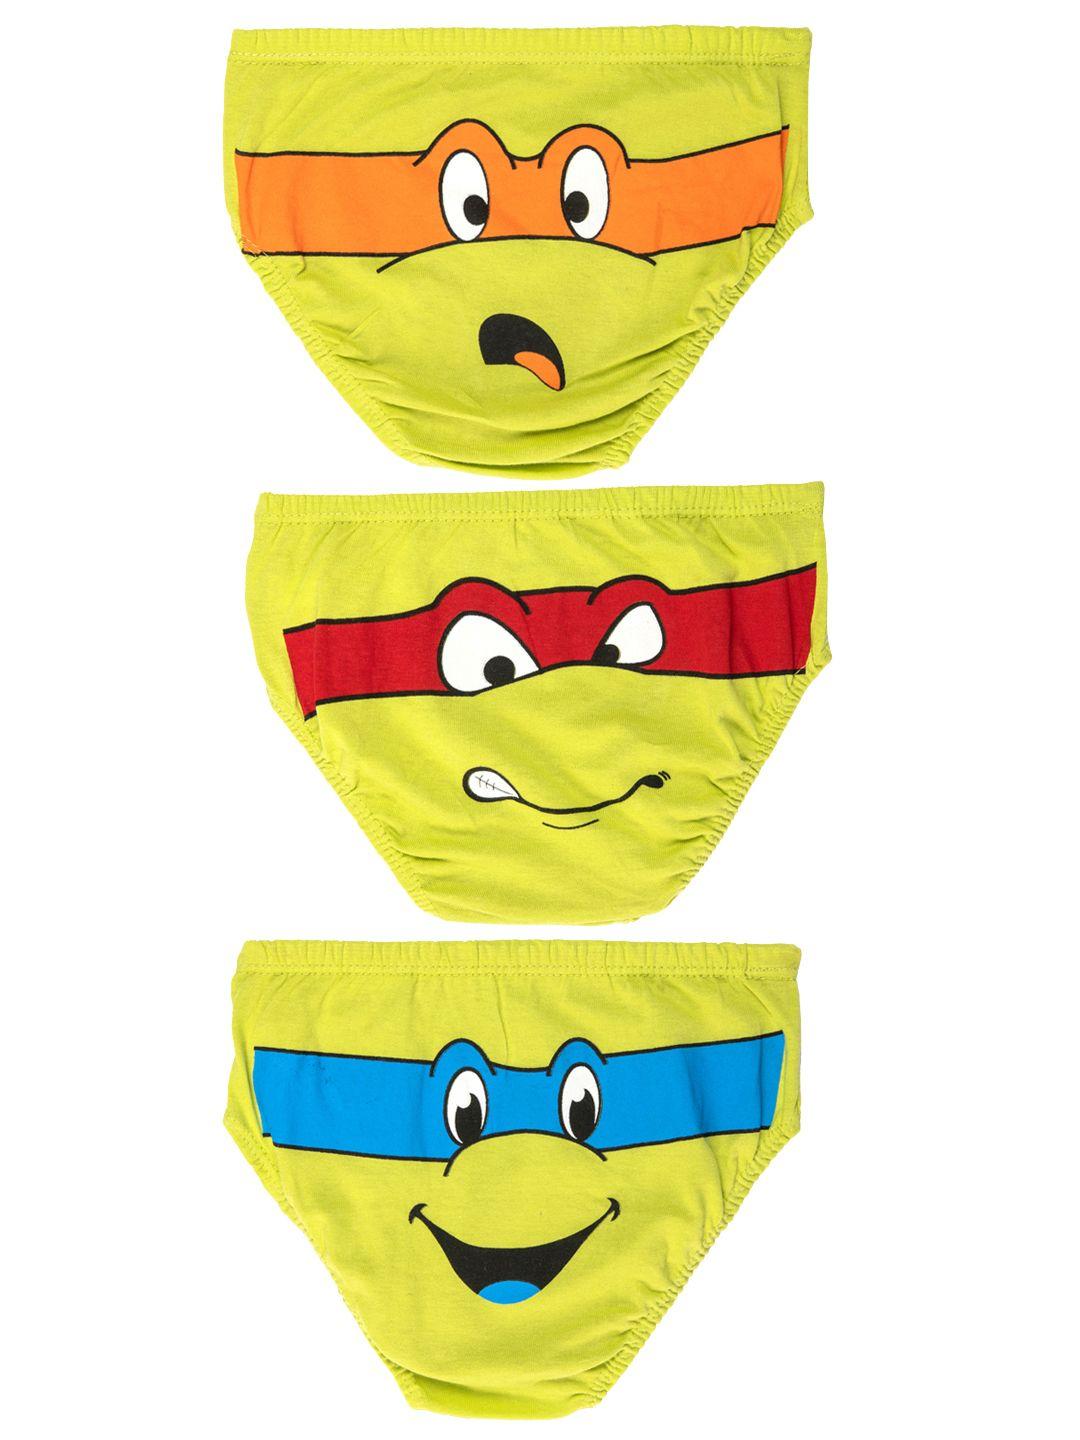 you got plan b boys pack of 3 yellow briefs time to turtle ub-turtletime: 8-10